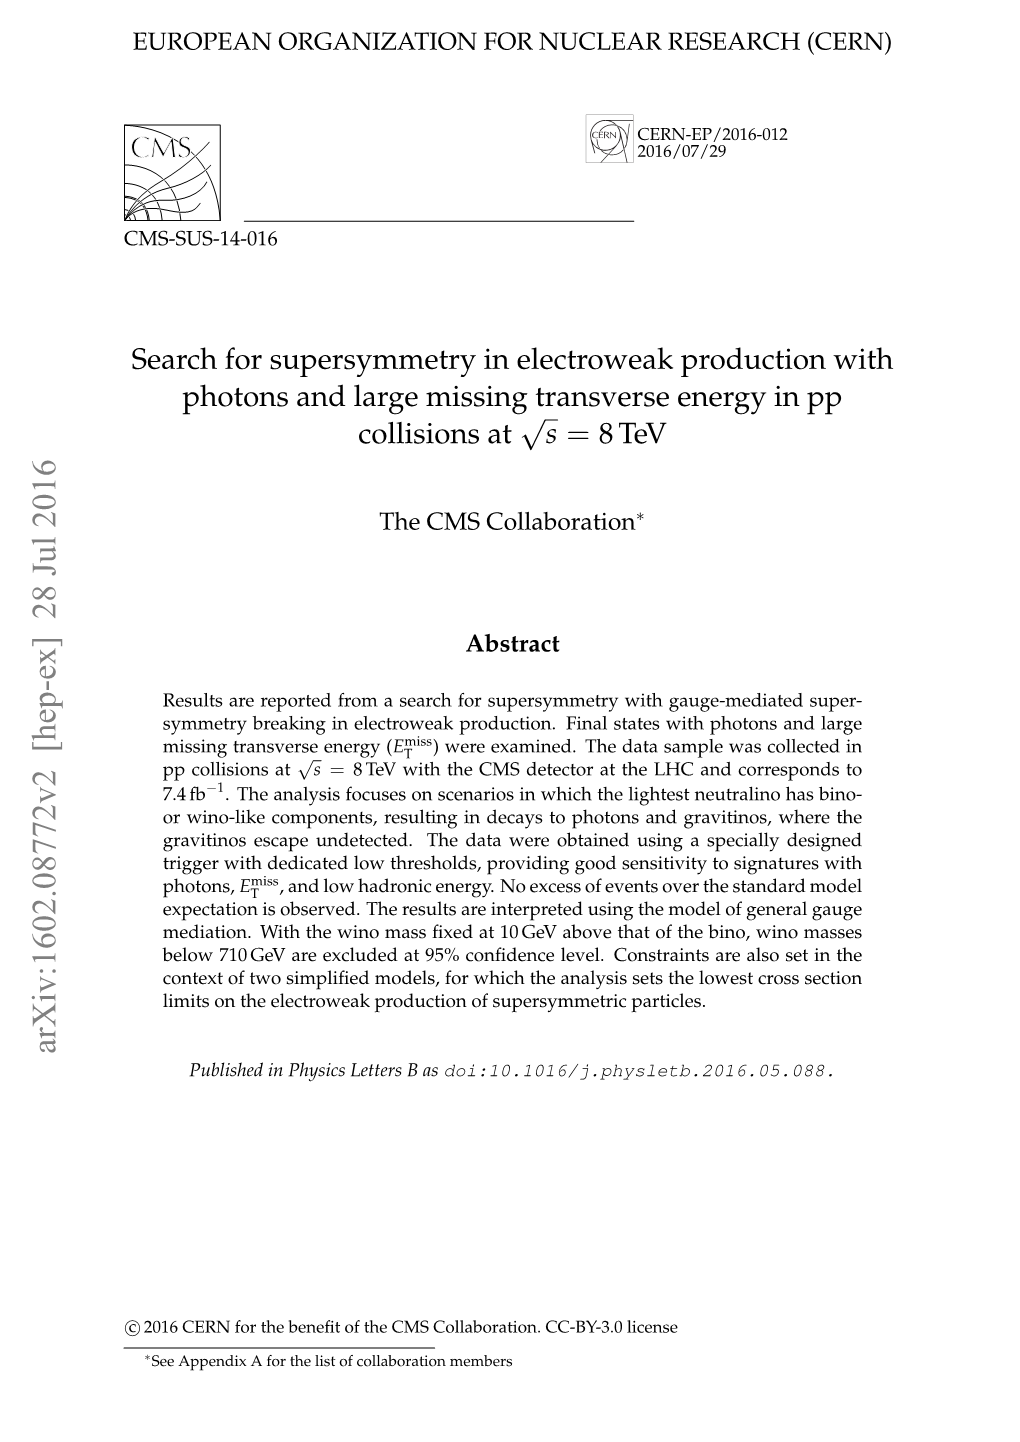 Search for Supersymmetry in Electroweak Production with Photons and Large Missing Transverse Energy in Pp Collisions at √S = 8 Tev